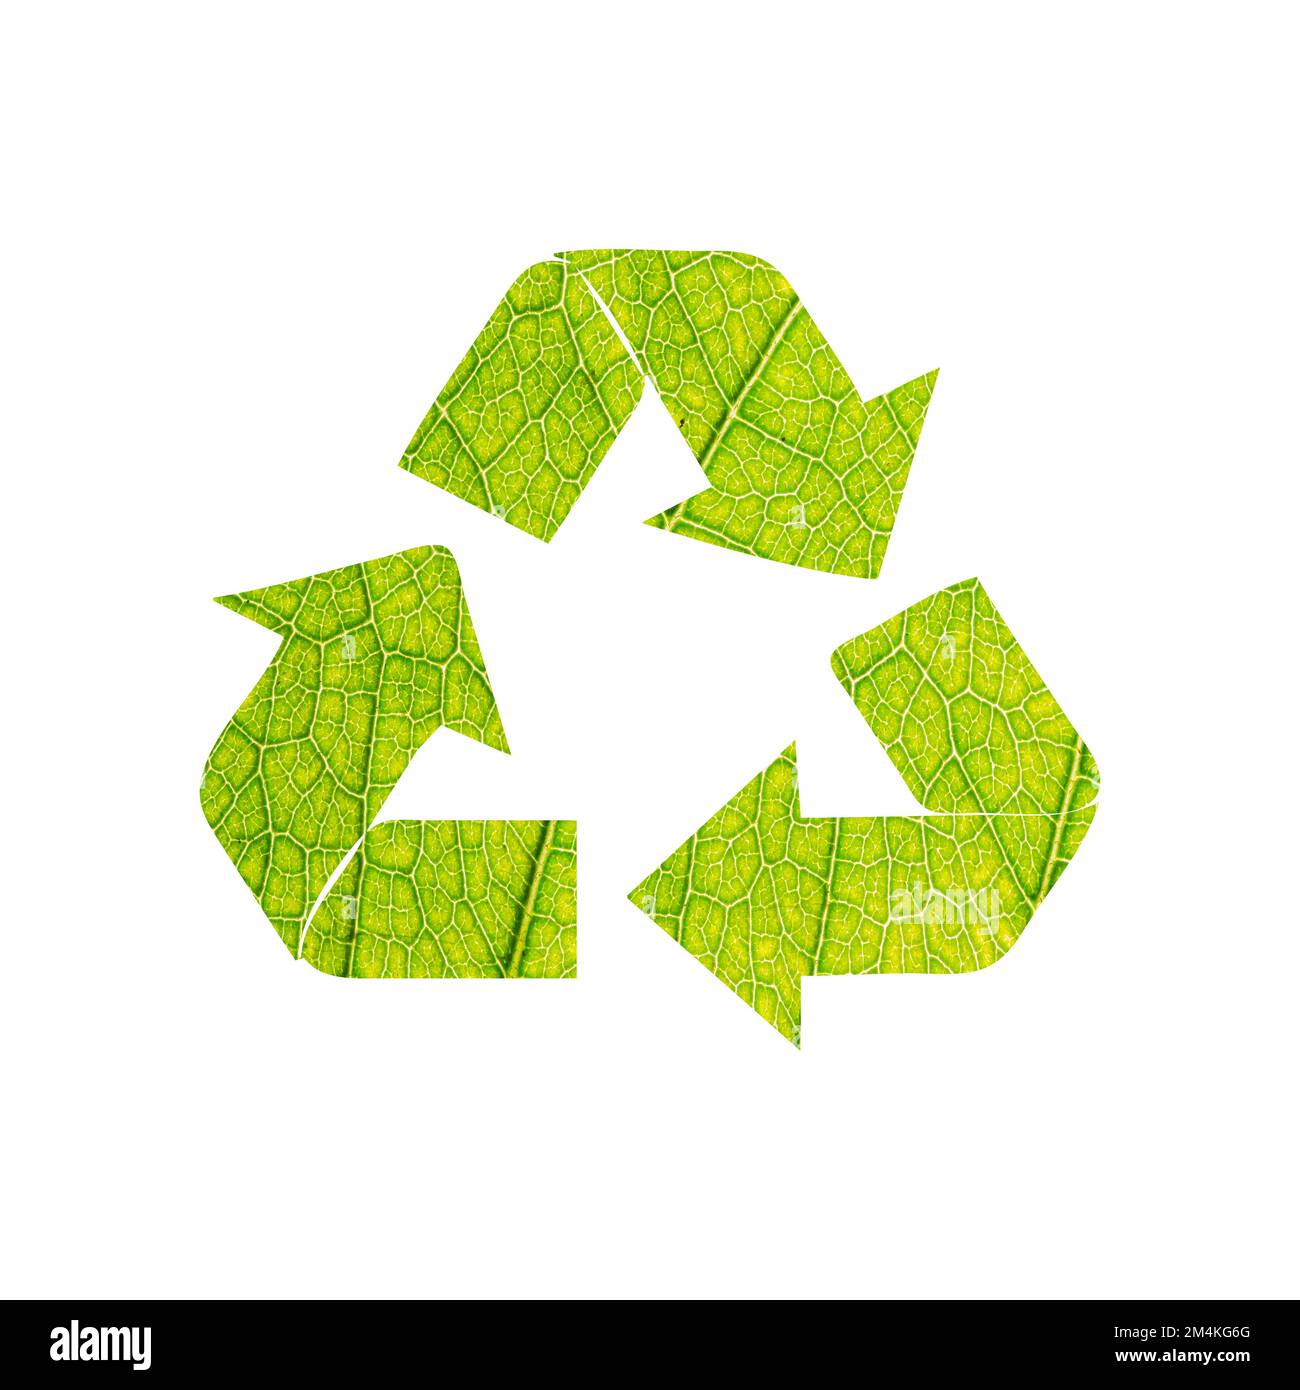 Recycle symbol with green leaf vein background. Stock Vector